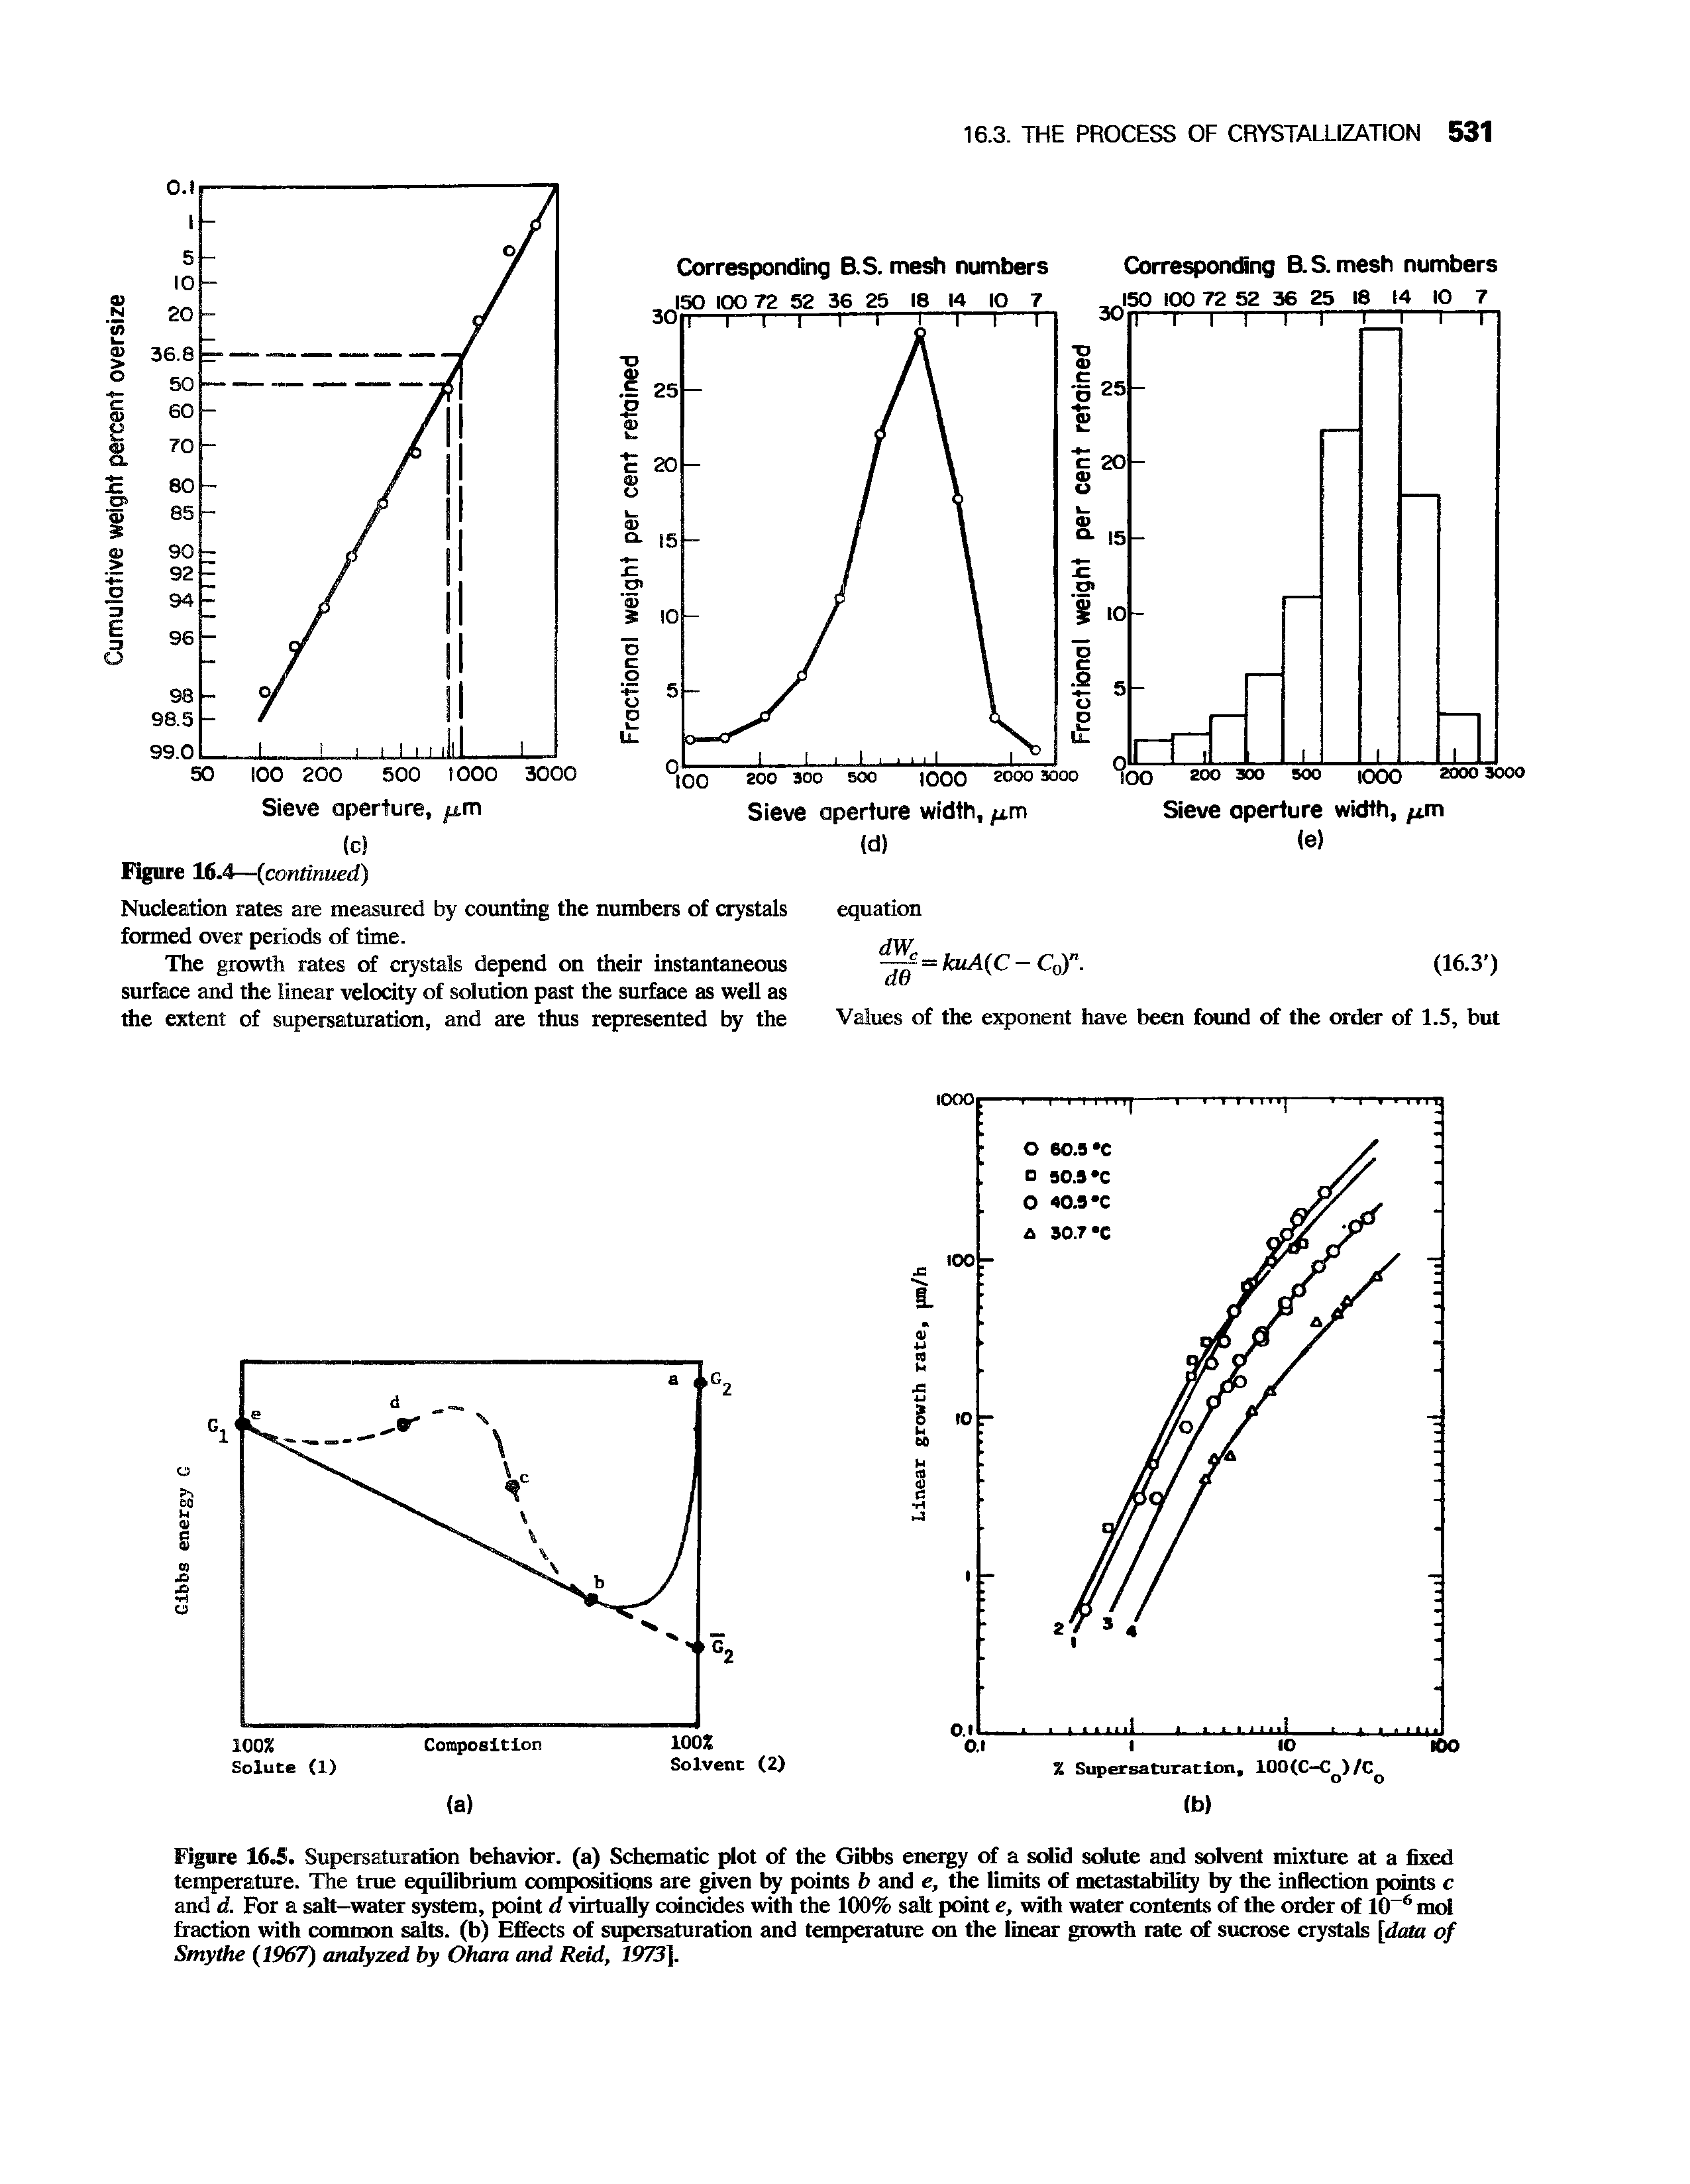 Figure 16.5. Supersaturation behavior, (a) Schematic plot of the Gibbs energy of a solid solute and solvent mixture at a fixed temperature. The true equilibrium compositions are given by points b and e, the limits of metastability by the inflection points c and d. For a salt-water system, point d virtually coincides with the 100% salt point e, with water contents of the order of 10-6 mol fraction with common salts, (b) Effects of supersaturation and temperature on the linear growth rate of sucrose crystals [data of Smythe (1967) analyzed by Ohara and Reid, 1973],...